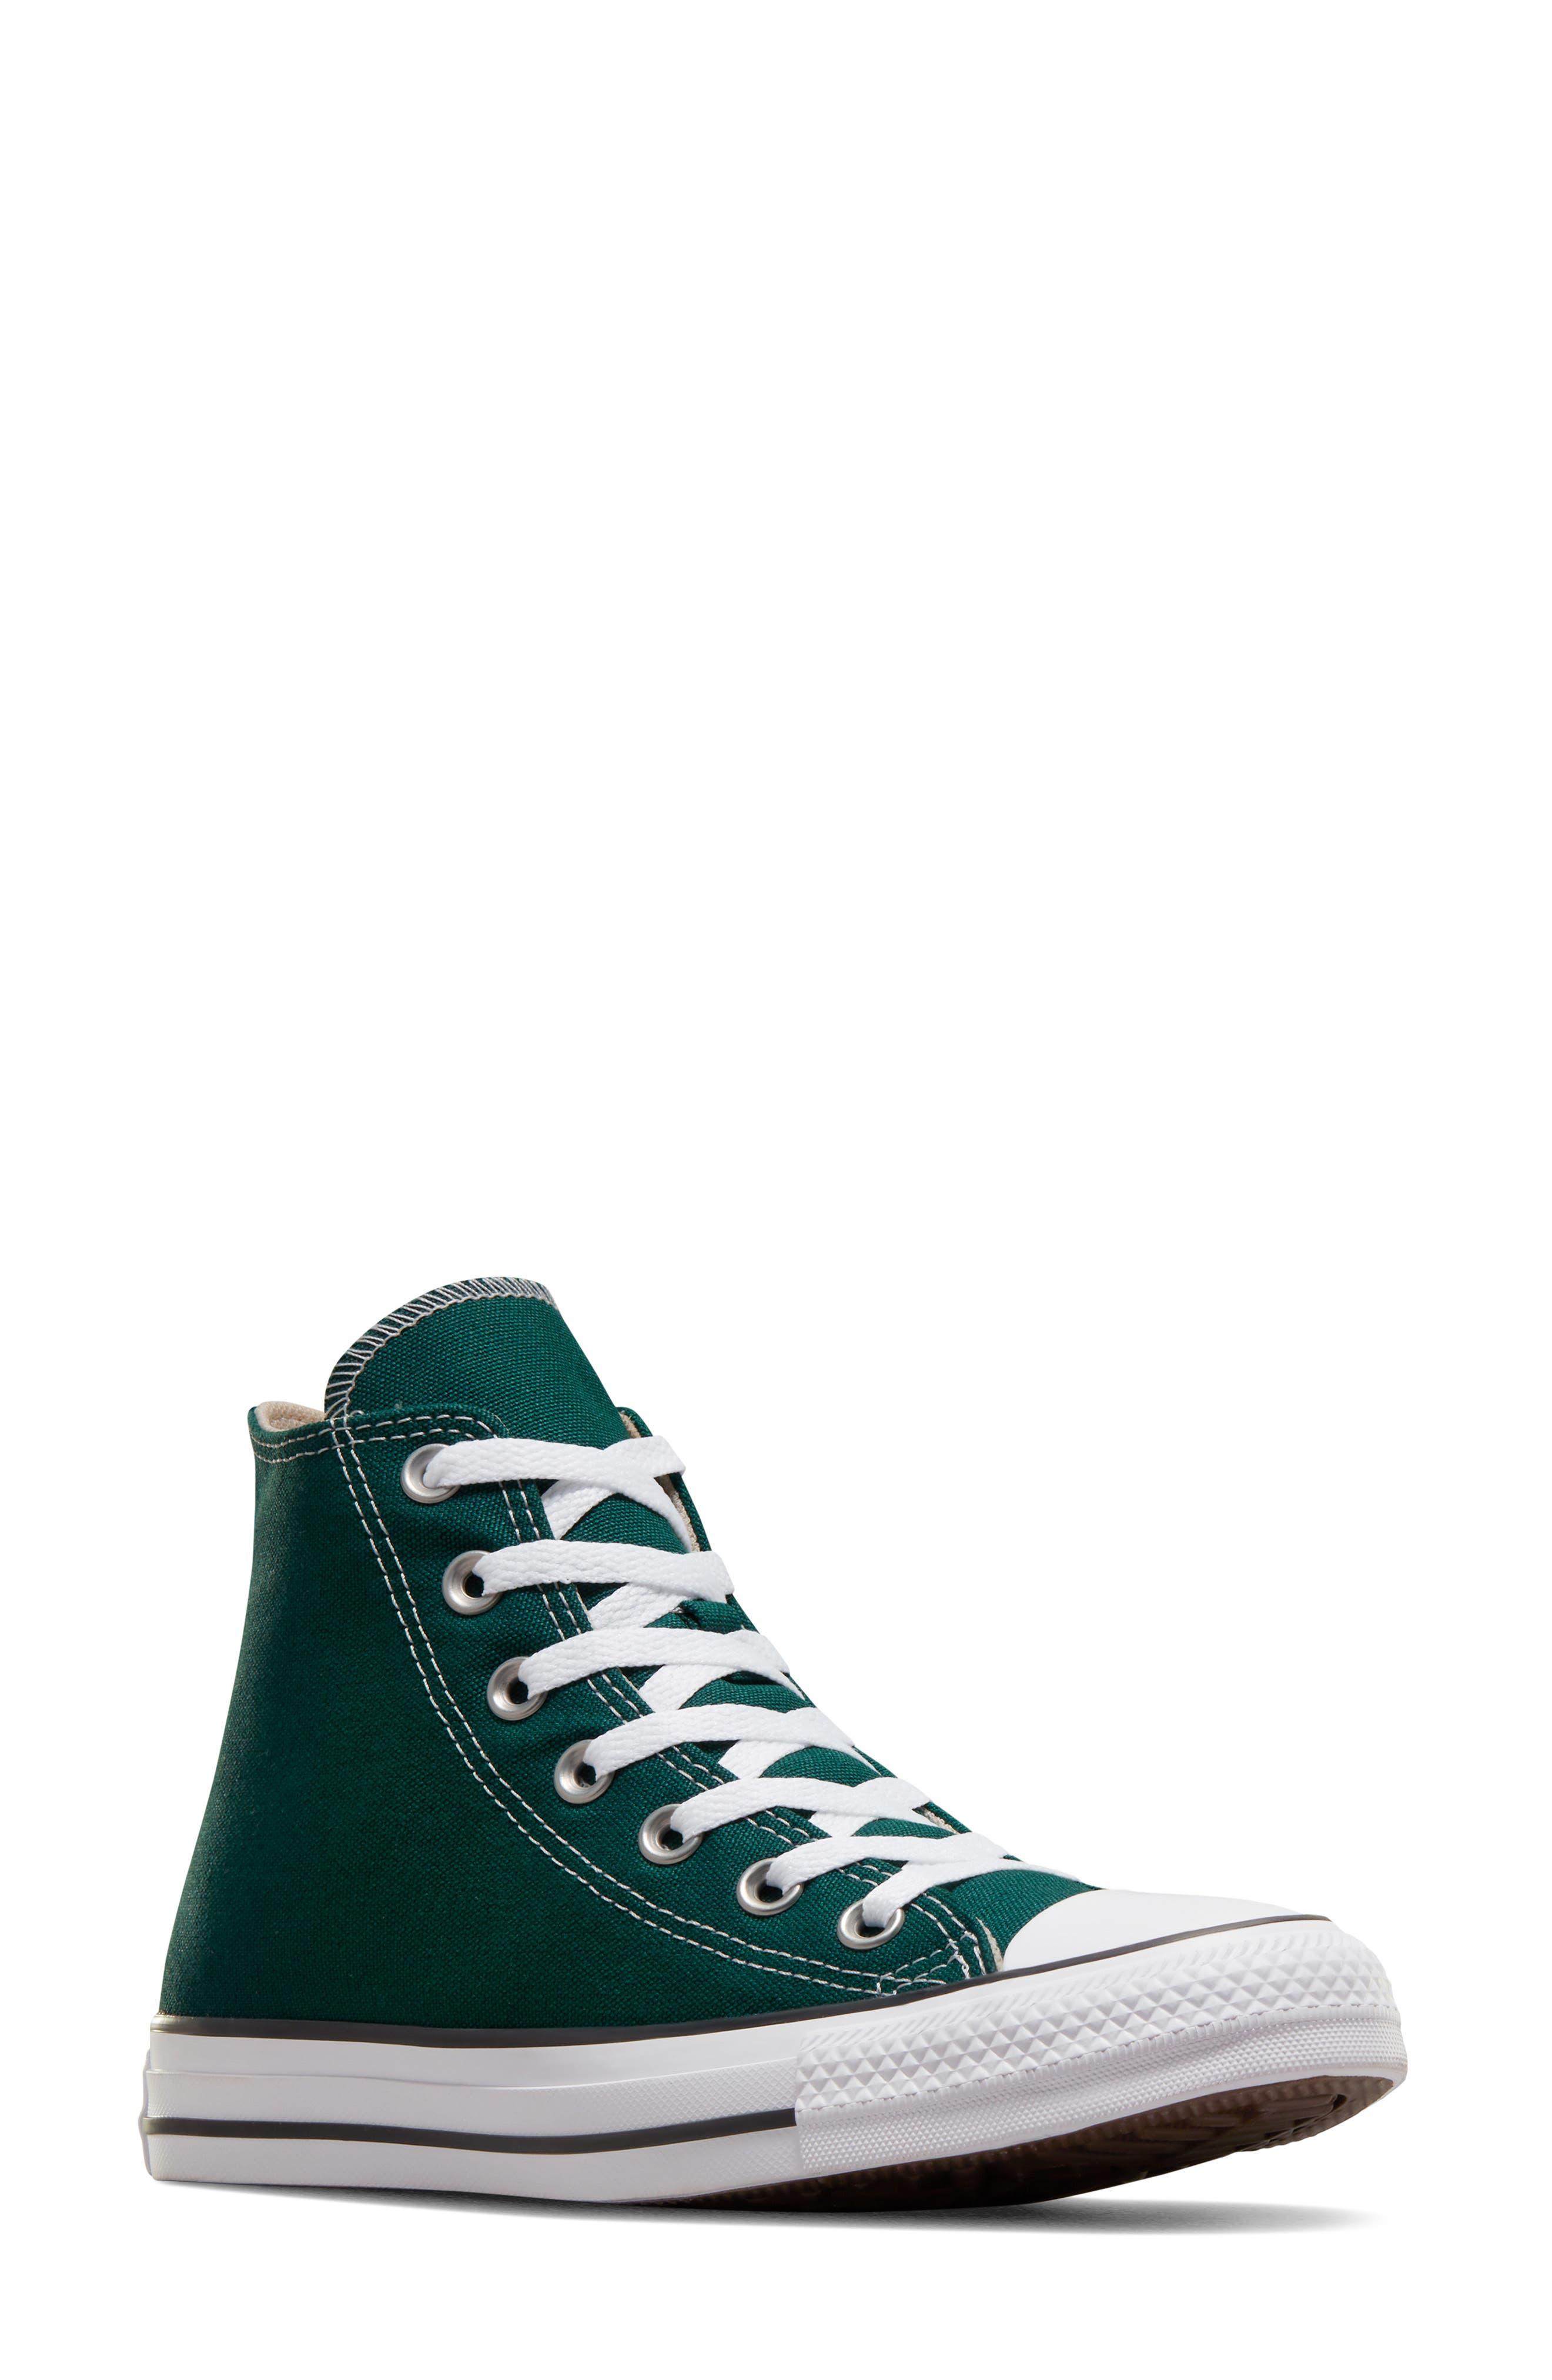 Converse Chuck Taylor® All Star® High Top Sneaker in Green | Lyst